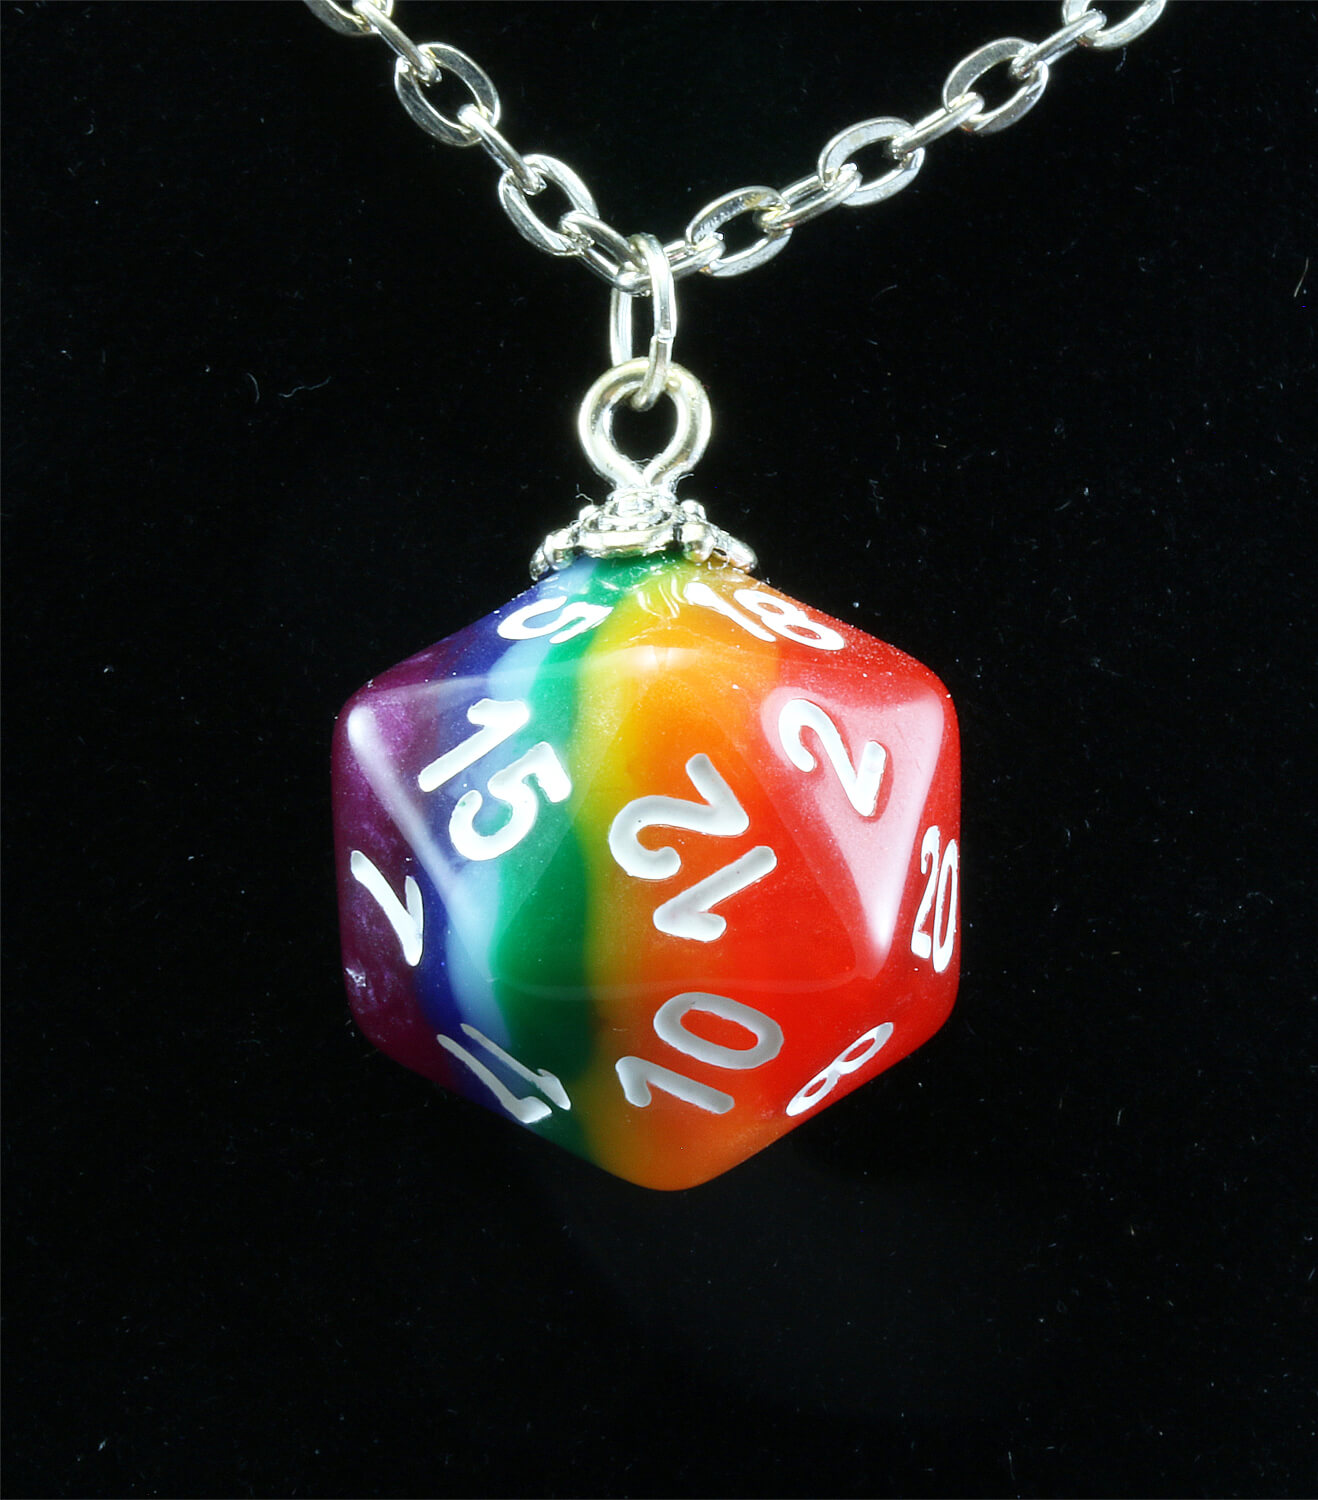 3D D20 Necklace Dice Necklace Polyhedral Dice Charm Necklace 3D Dice  Jewelry Dungeons and Dragons Necklace D&D Necklace 